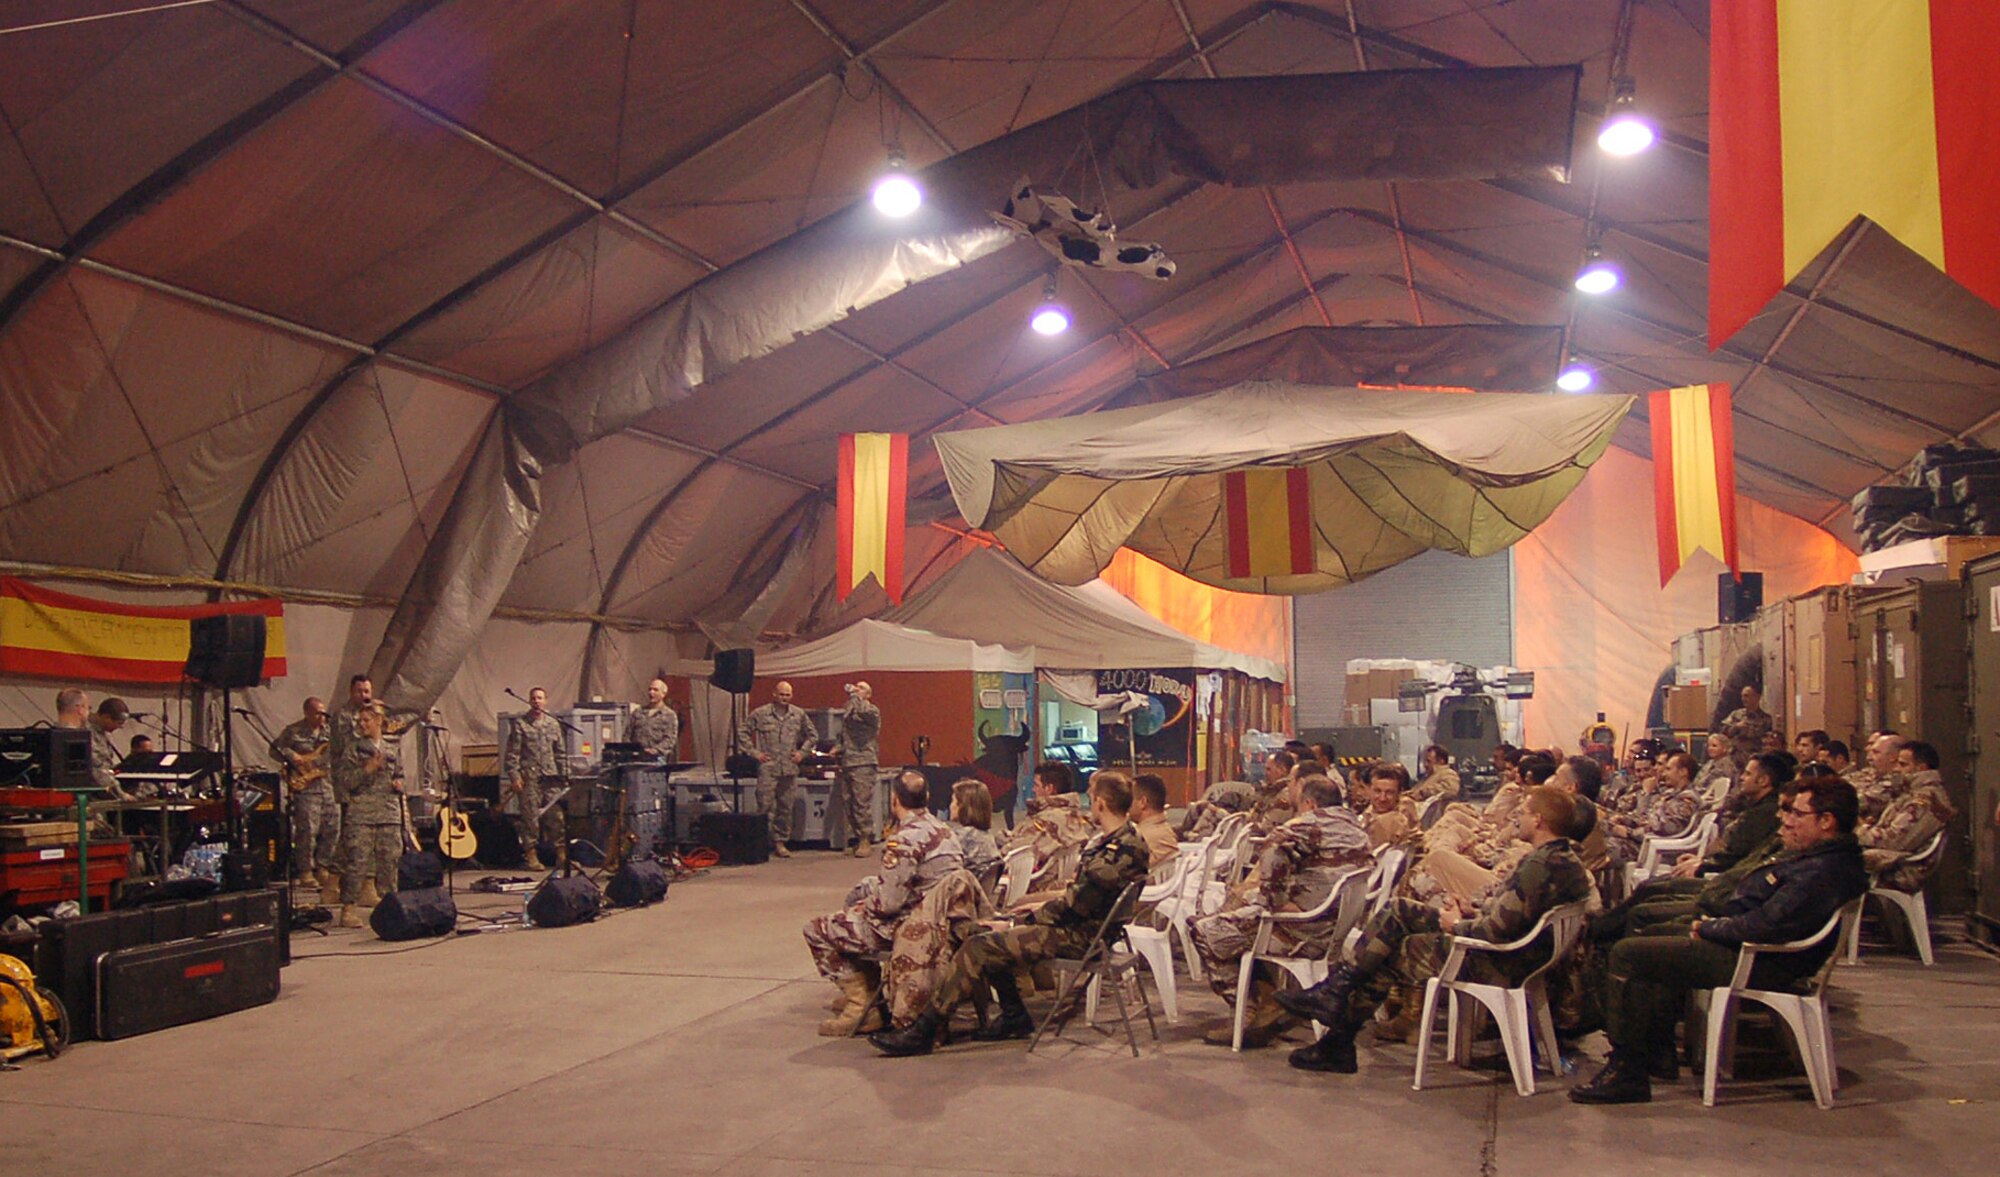 Sirocco, the U.S. Air Forces Central Expeditionary Band, plays one of their last performances at Manas Air Base, Kyrgyzstan, March 21. The band members are deployed to Southwest Asia from the U.S. Air Forces in Europe Band at Sembach AB, Germany. (U.S. Air Force photo/Tech. Sgt. Elizabeth Weinberg)